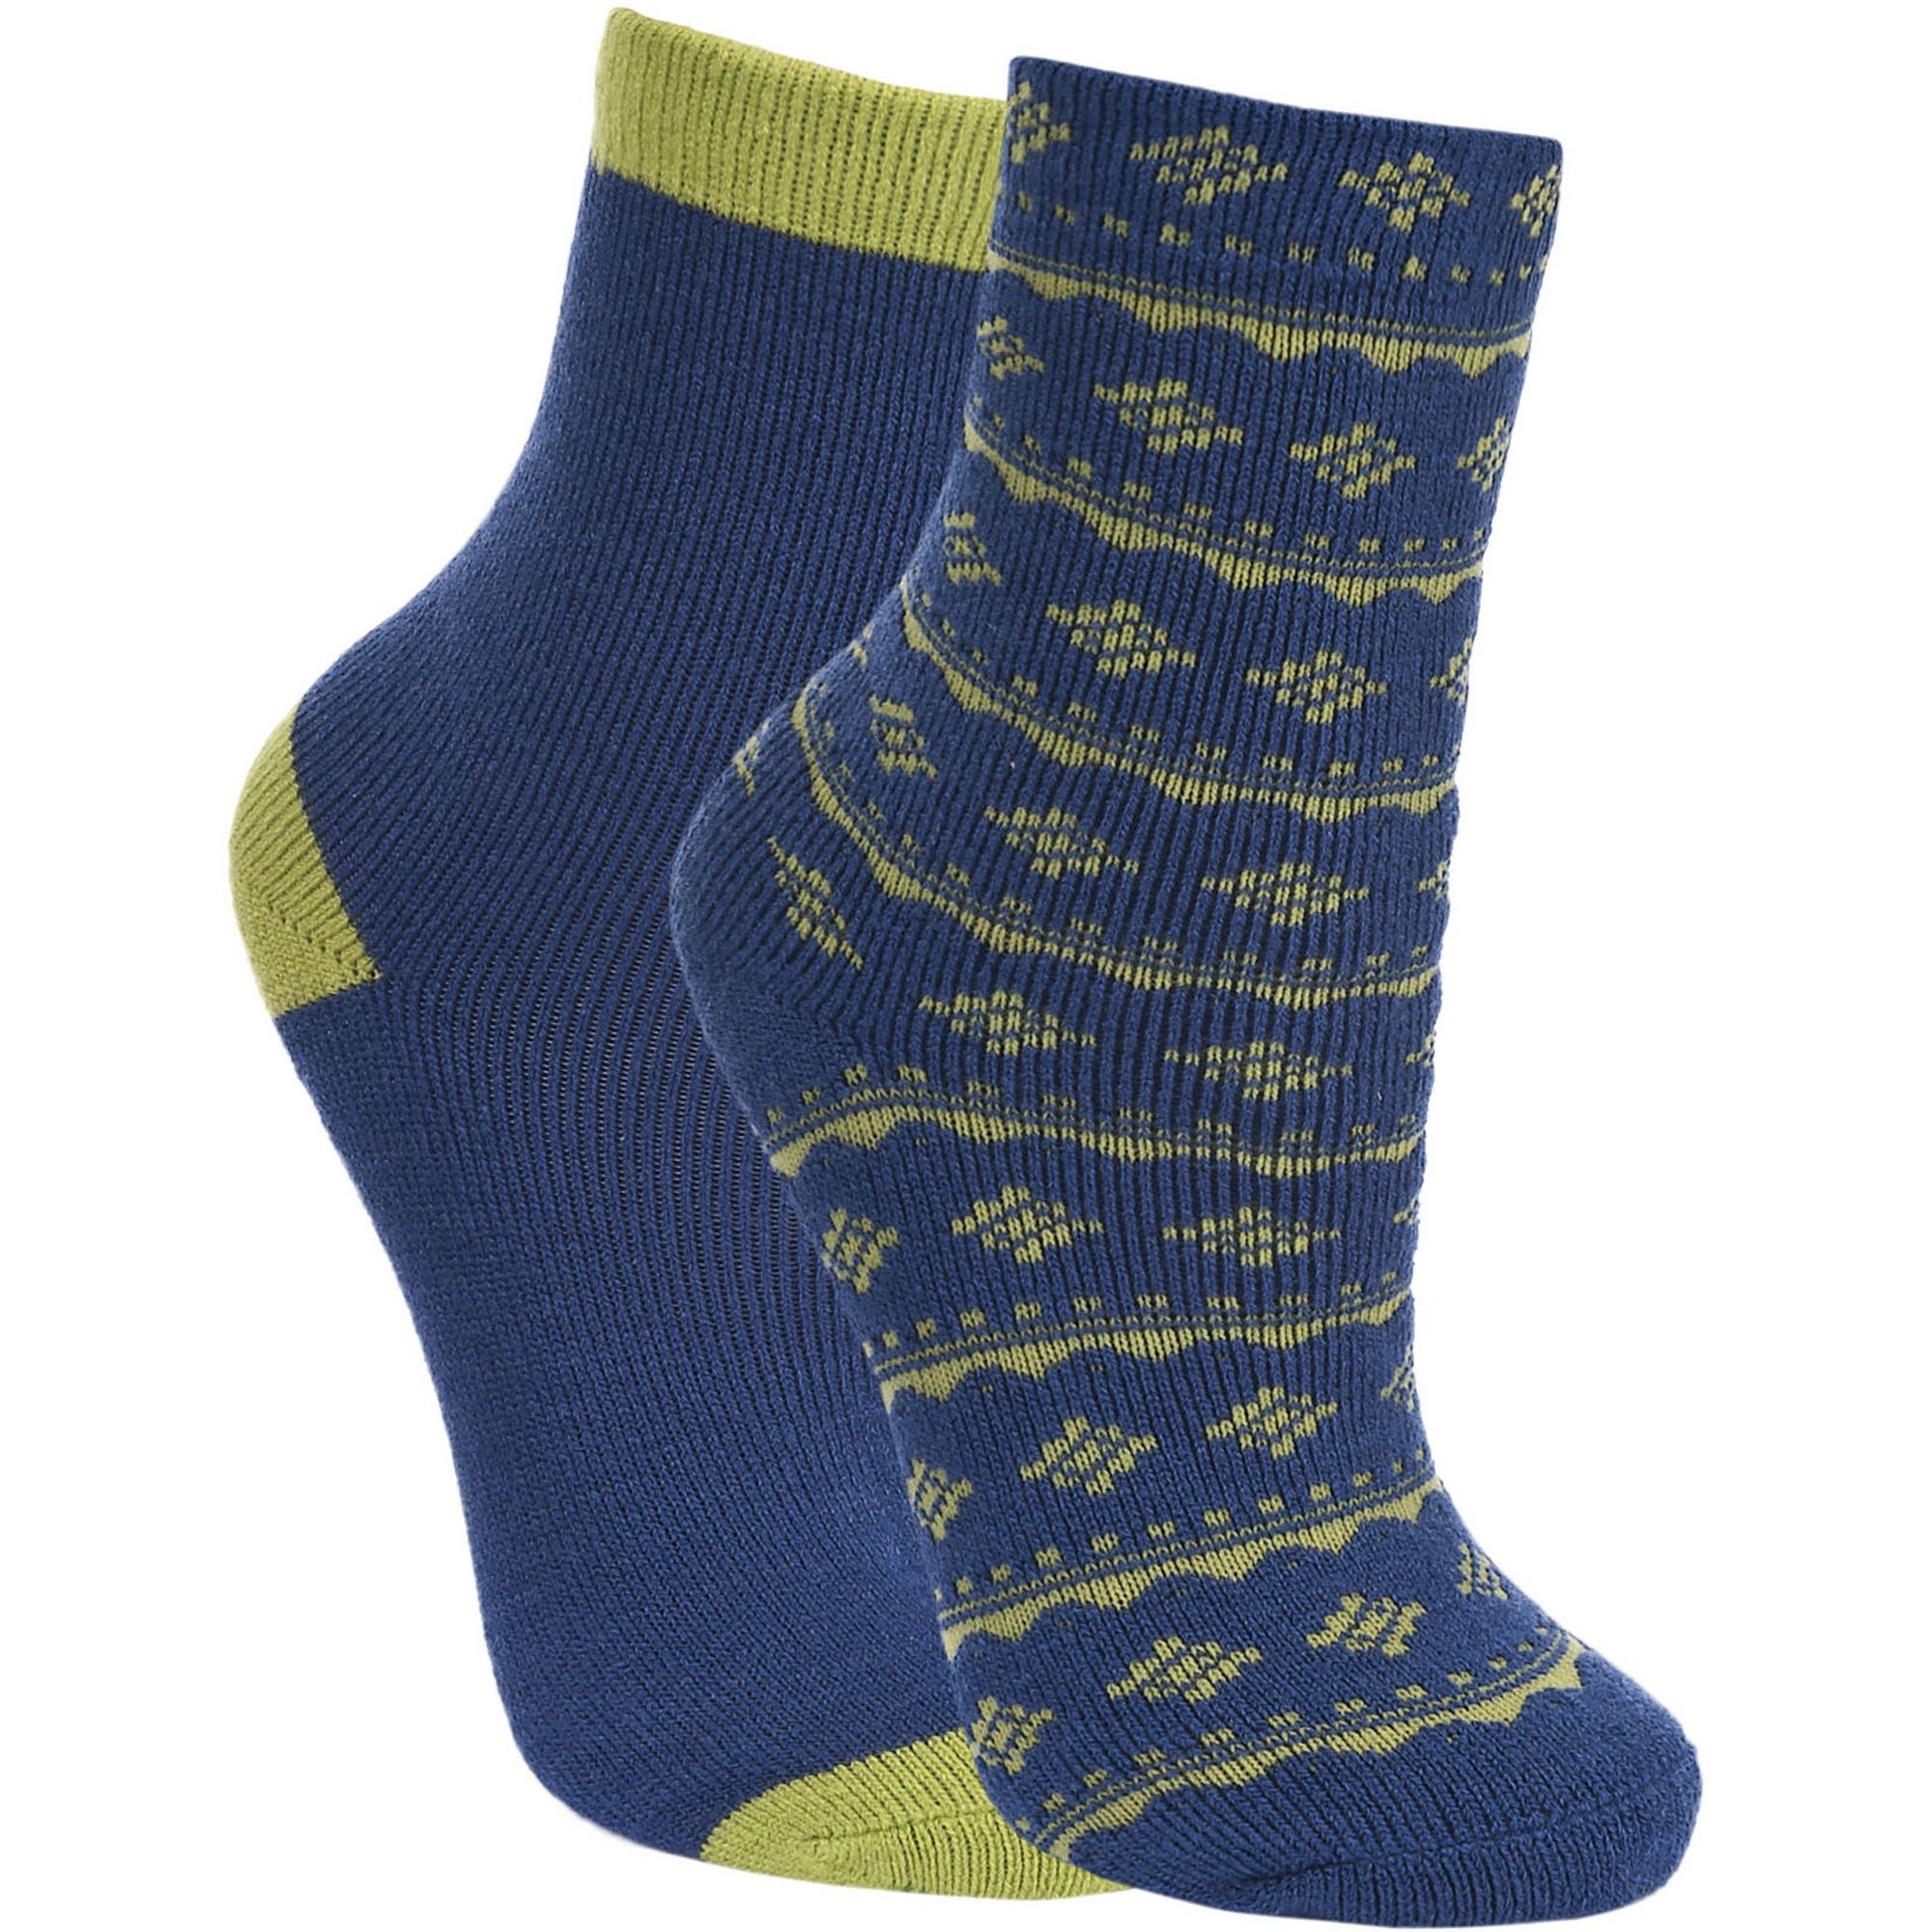 Childrens casual two tone socks. Two pairs per pack. Includes one plain pair and one patterned pair. Choice of 2 colour packs. Choice of 2 sizes: 9-12 UK Youth or 12 UK Youth - 3 UK. 80% Acrylic, 14% Elastane, 5% Polyamide, 1% Polyester.